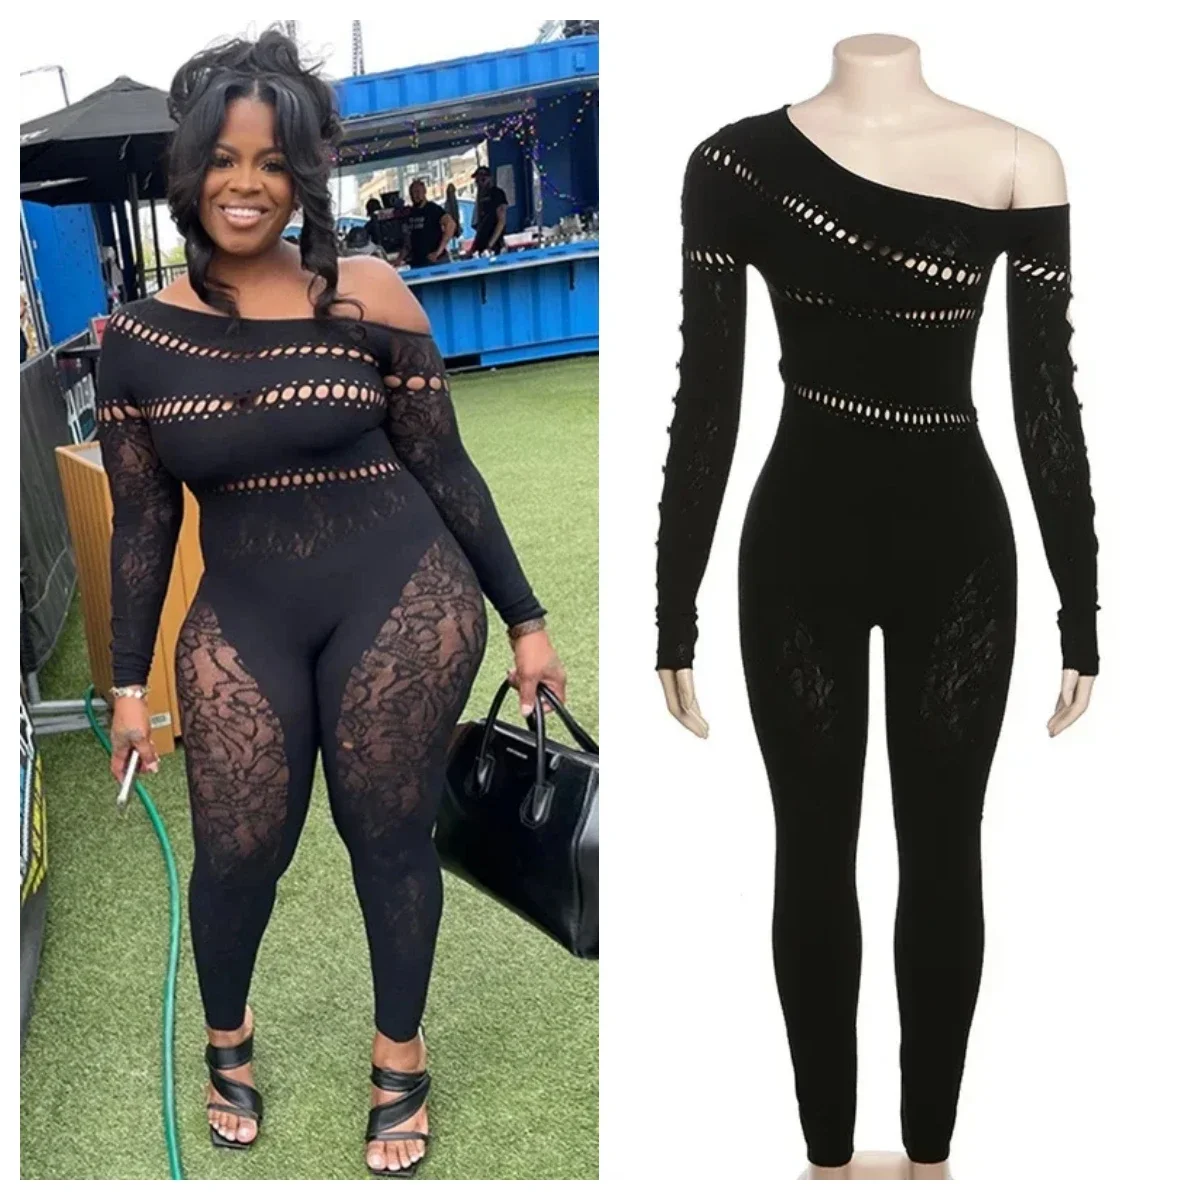 Thick Jacquard Knitted Jumpsuit Women Sexy Hollow Out Off Shoulder Long Sleeve High Stretch Slim Casual Rompers Clubwear Overall vintage pattern print long pants jumpsuit women deep v lapel shirt playsuit overall elegant slim waist lace up long sleeved